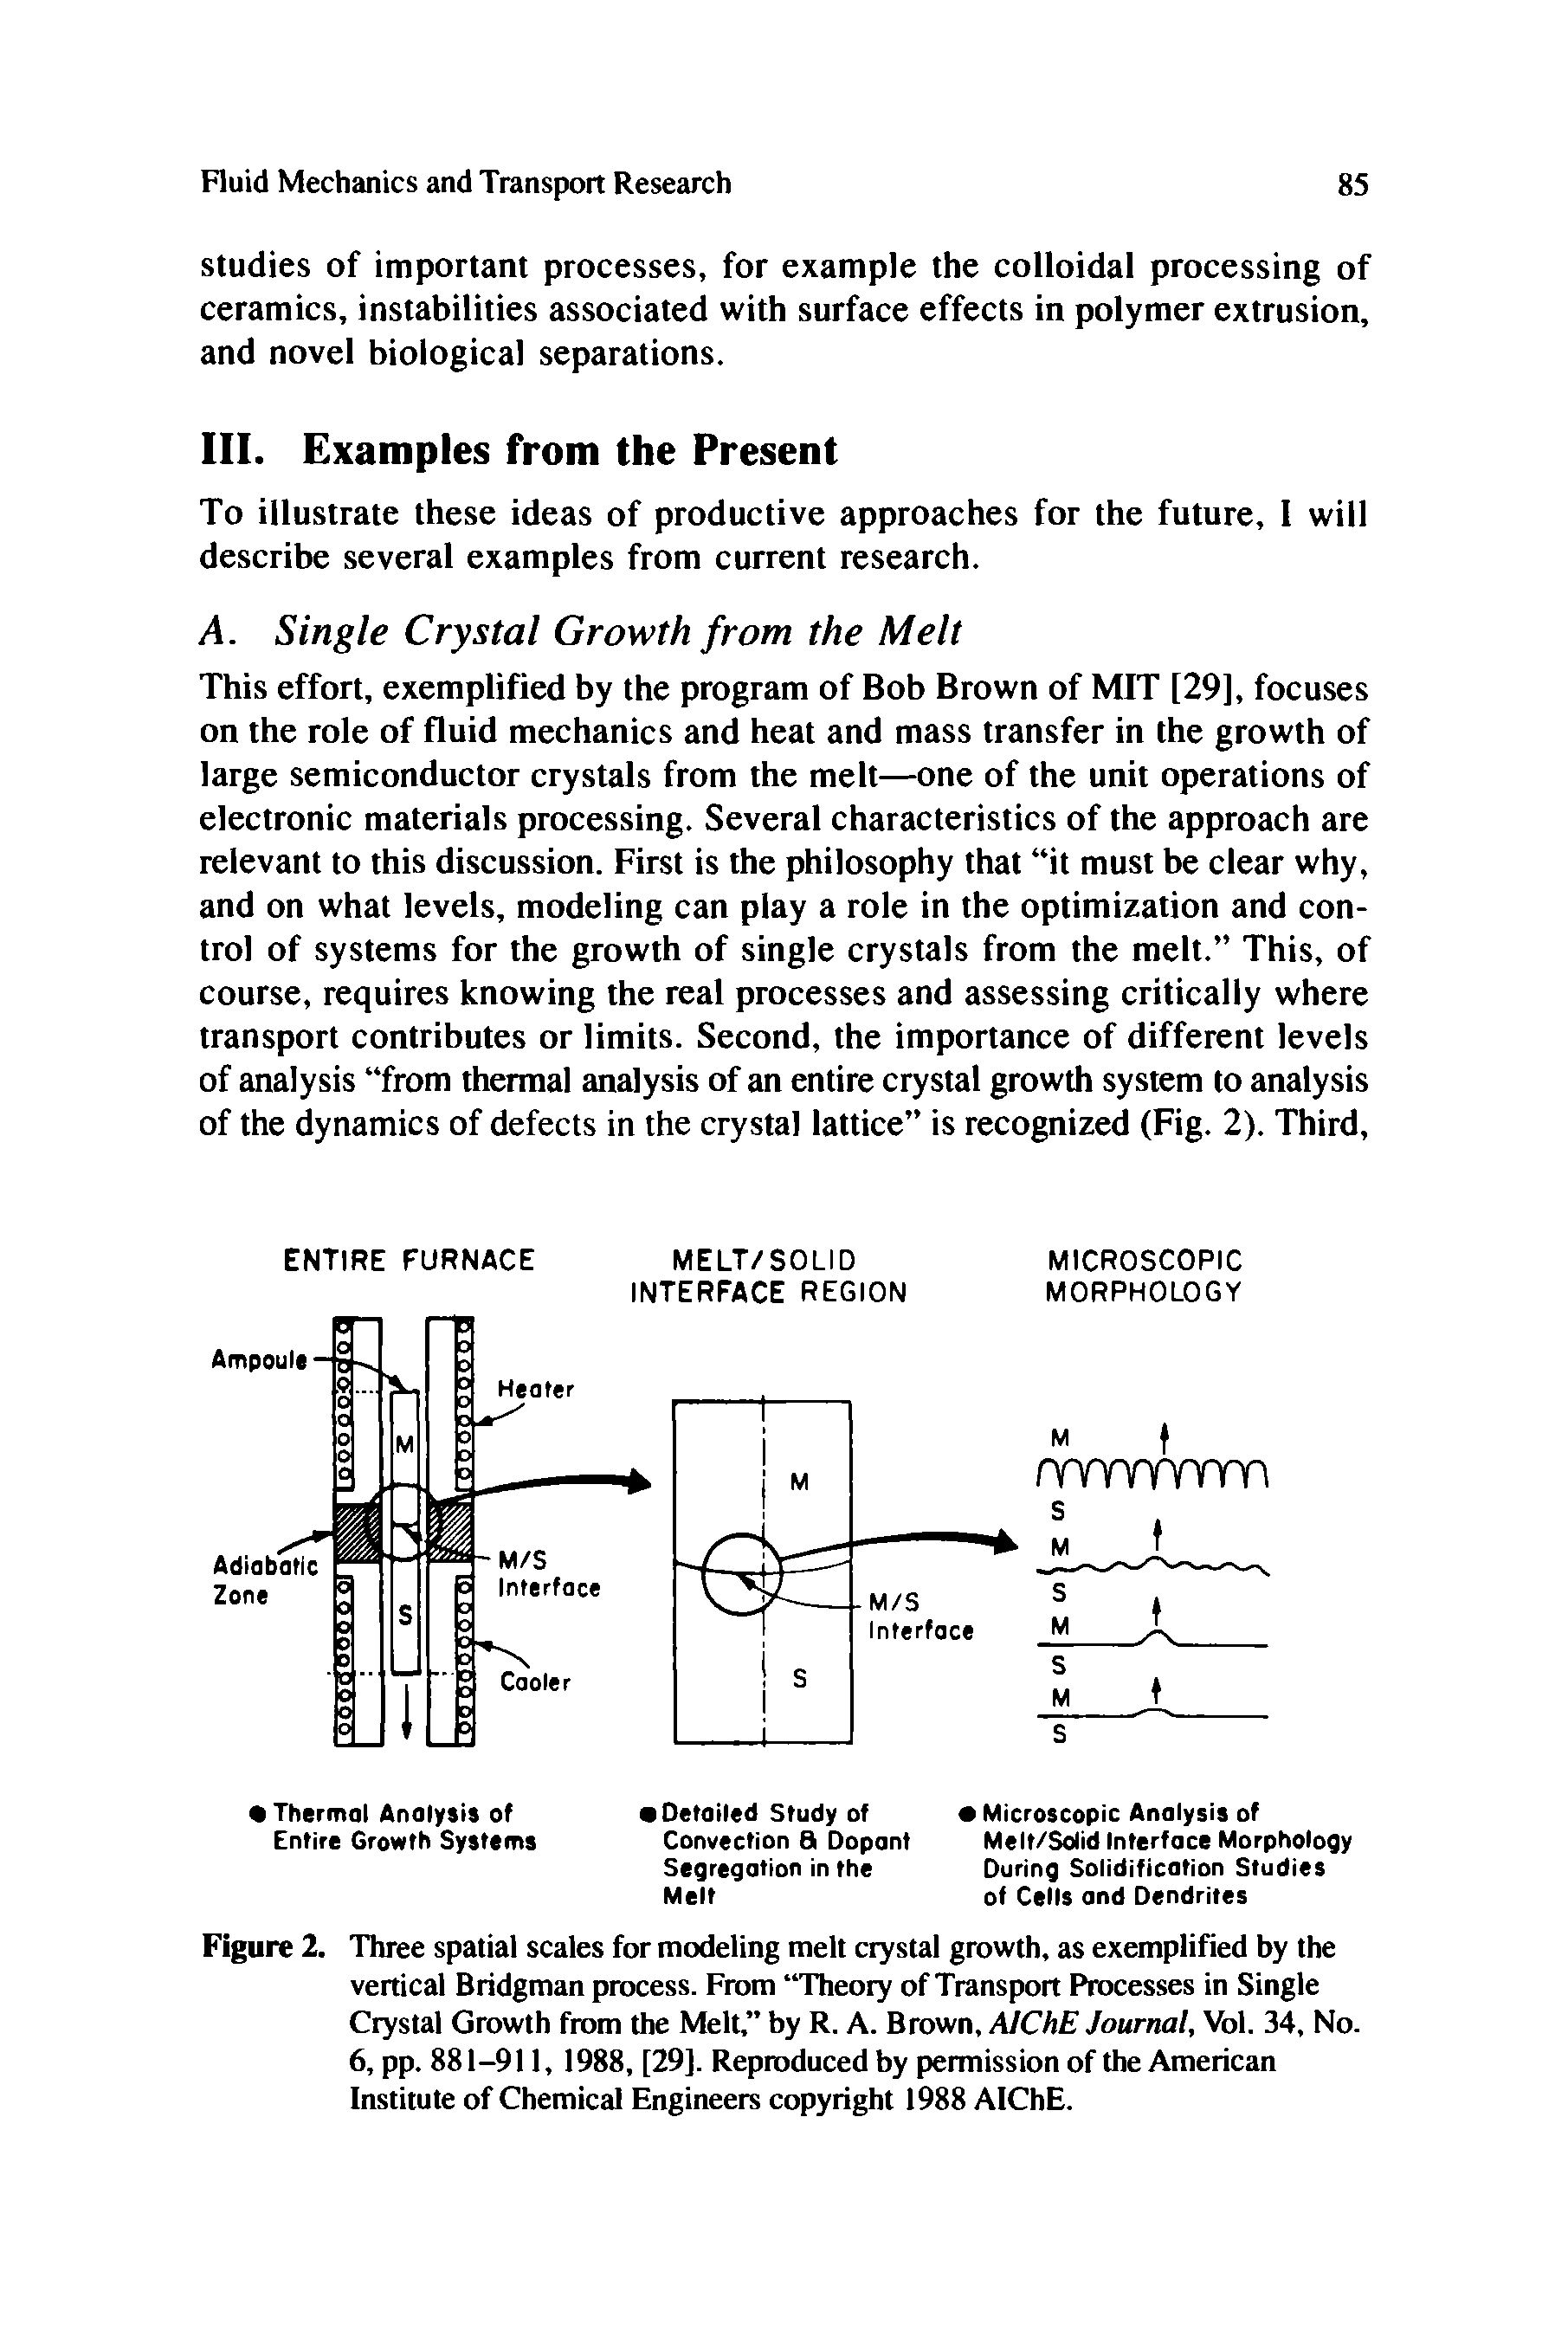 Figure 2. Three spatial scales for modeling melt crystal growth, as exemplified by the vertical Bridgman process. From Theory of Transport Processes in Single Crystal Growth from the Melt, by R. A. Brown, AJChE Journal, Vol. 34, No. 6, pp. 881-911, 1988, [29]. Reproduced by permission of the American Institute of Chemical Engineers copyright 1988 AIChE.